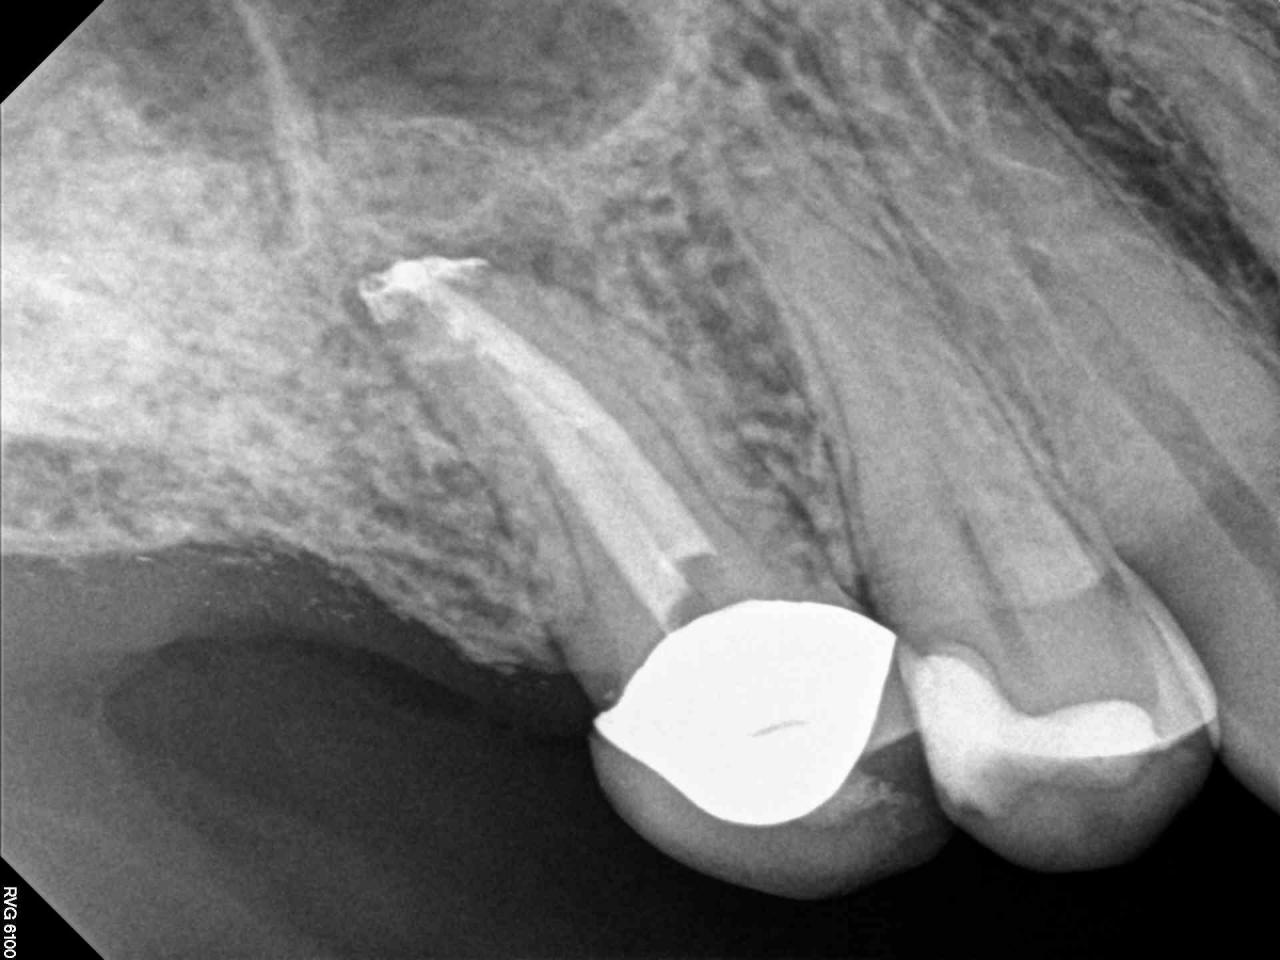 X Ray for Endodontic Work